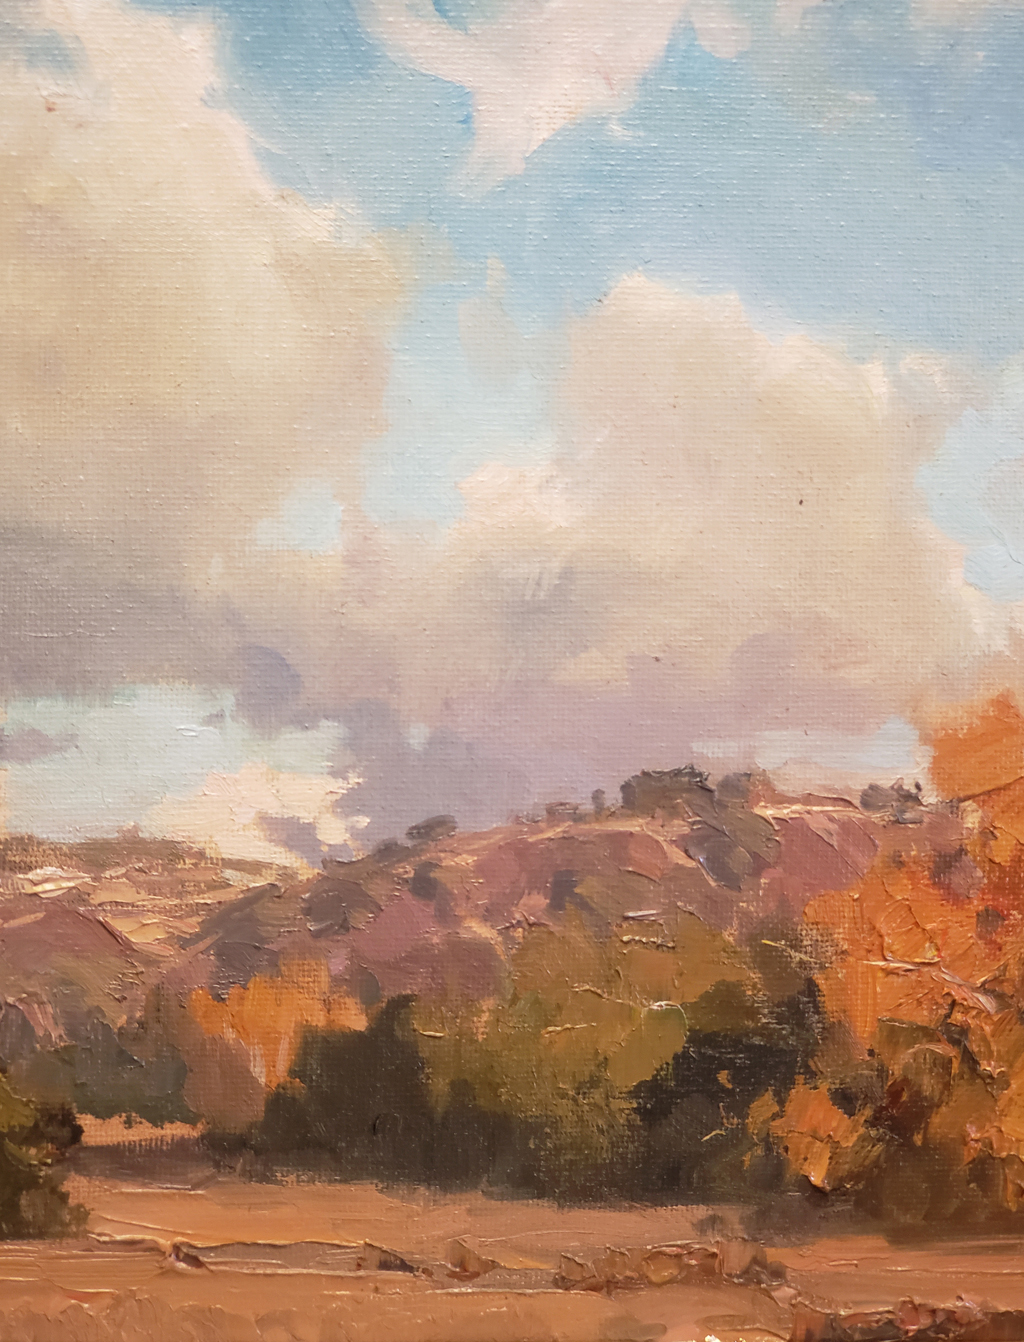 American Legacy FIne Arts presents "Departure; Laguna Canyon" a painting by Michael Obermeyer.